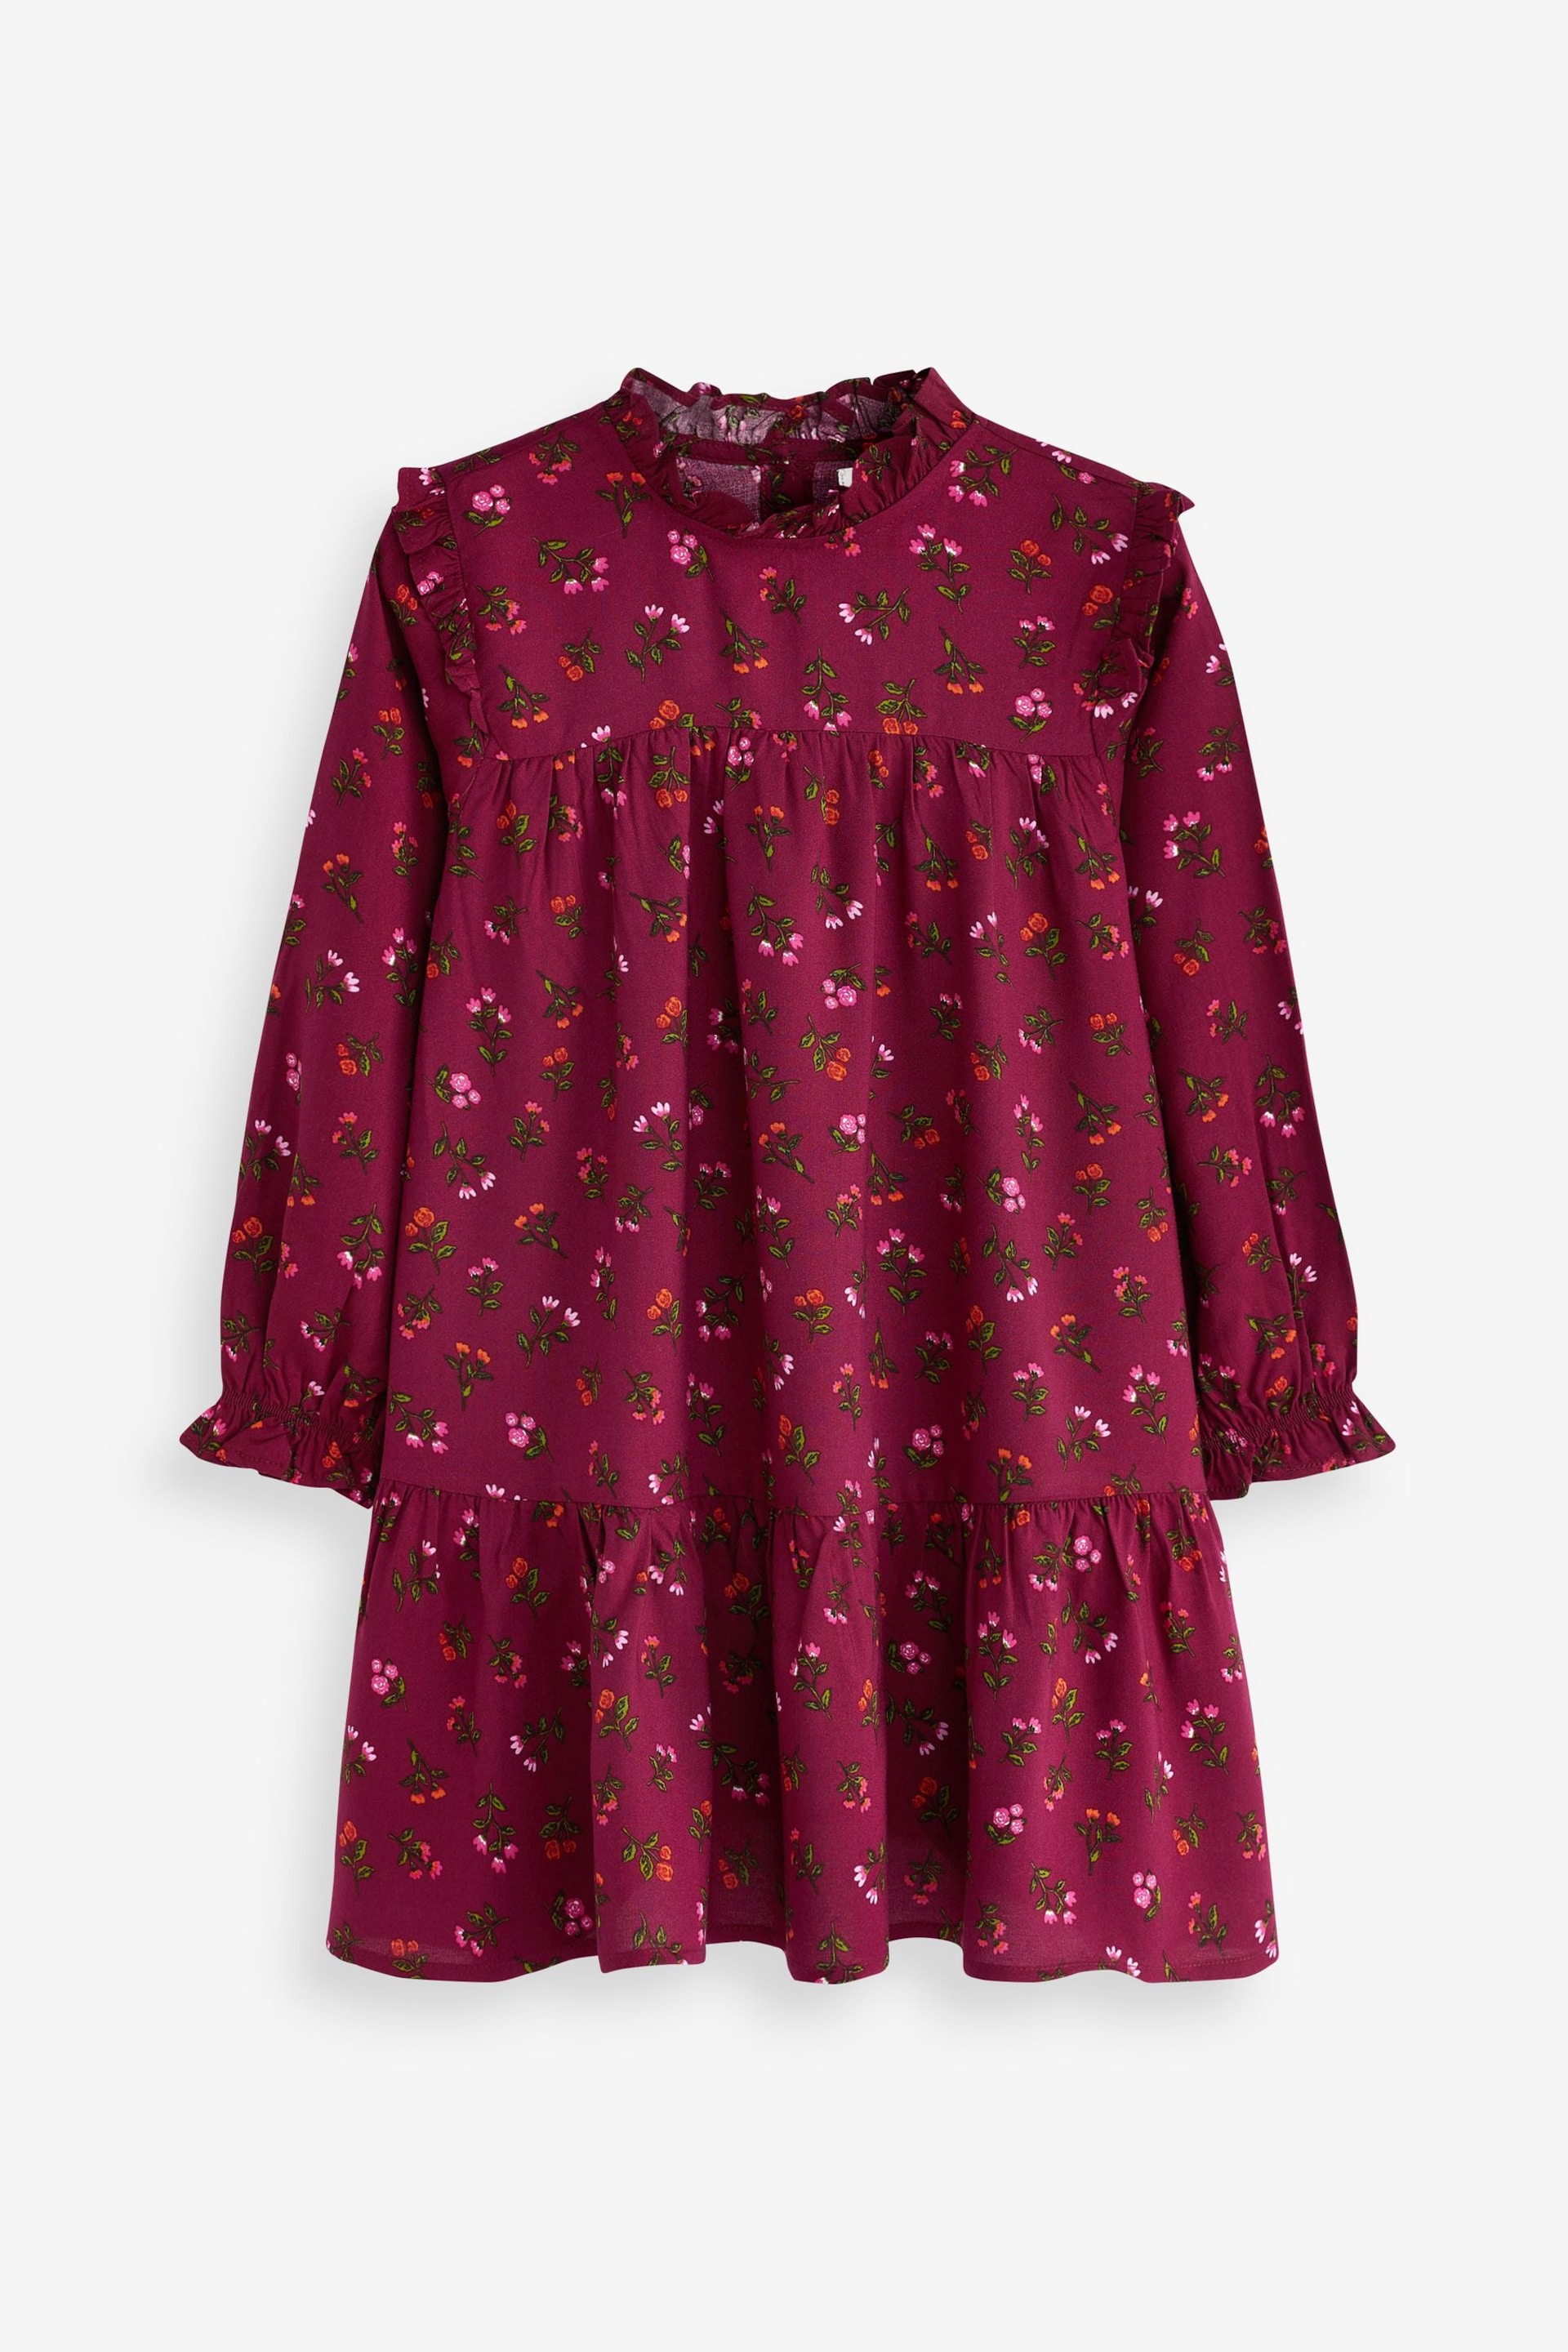 Berry Red Ditsy Print High Neck Long Sleeve Dress (12mths-16yrs) - Image 3 of 5